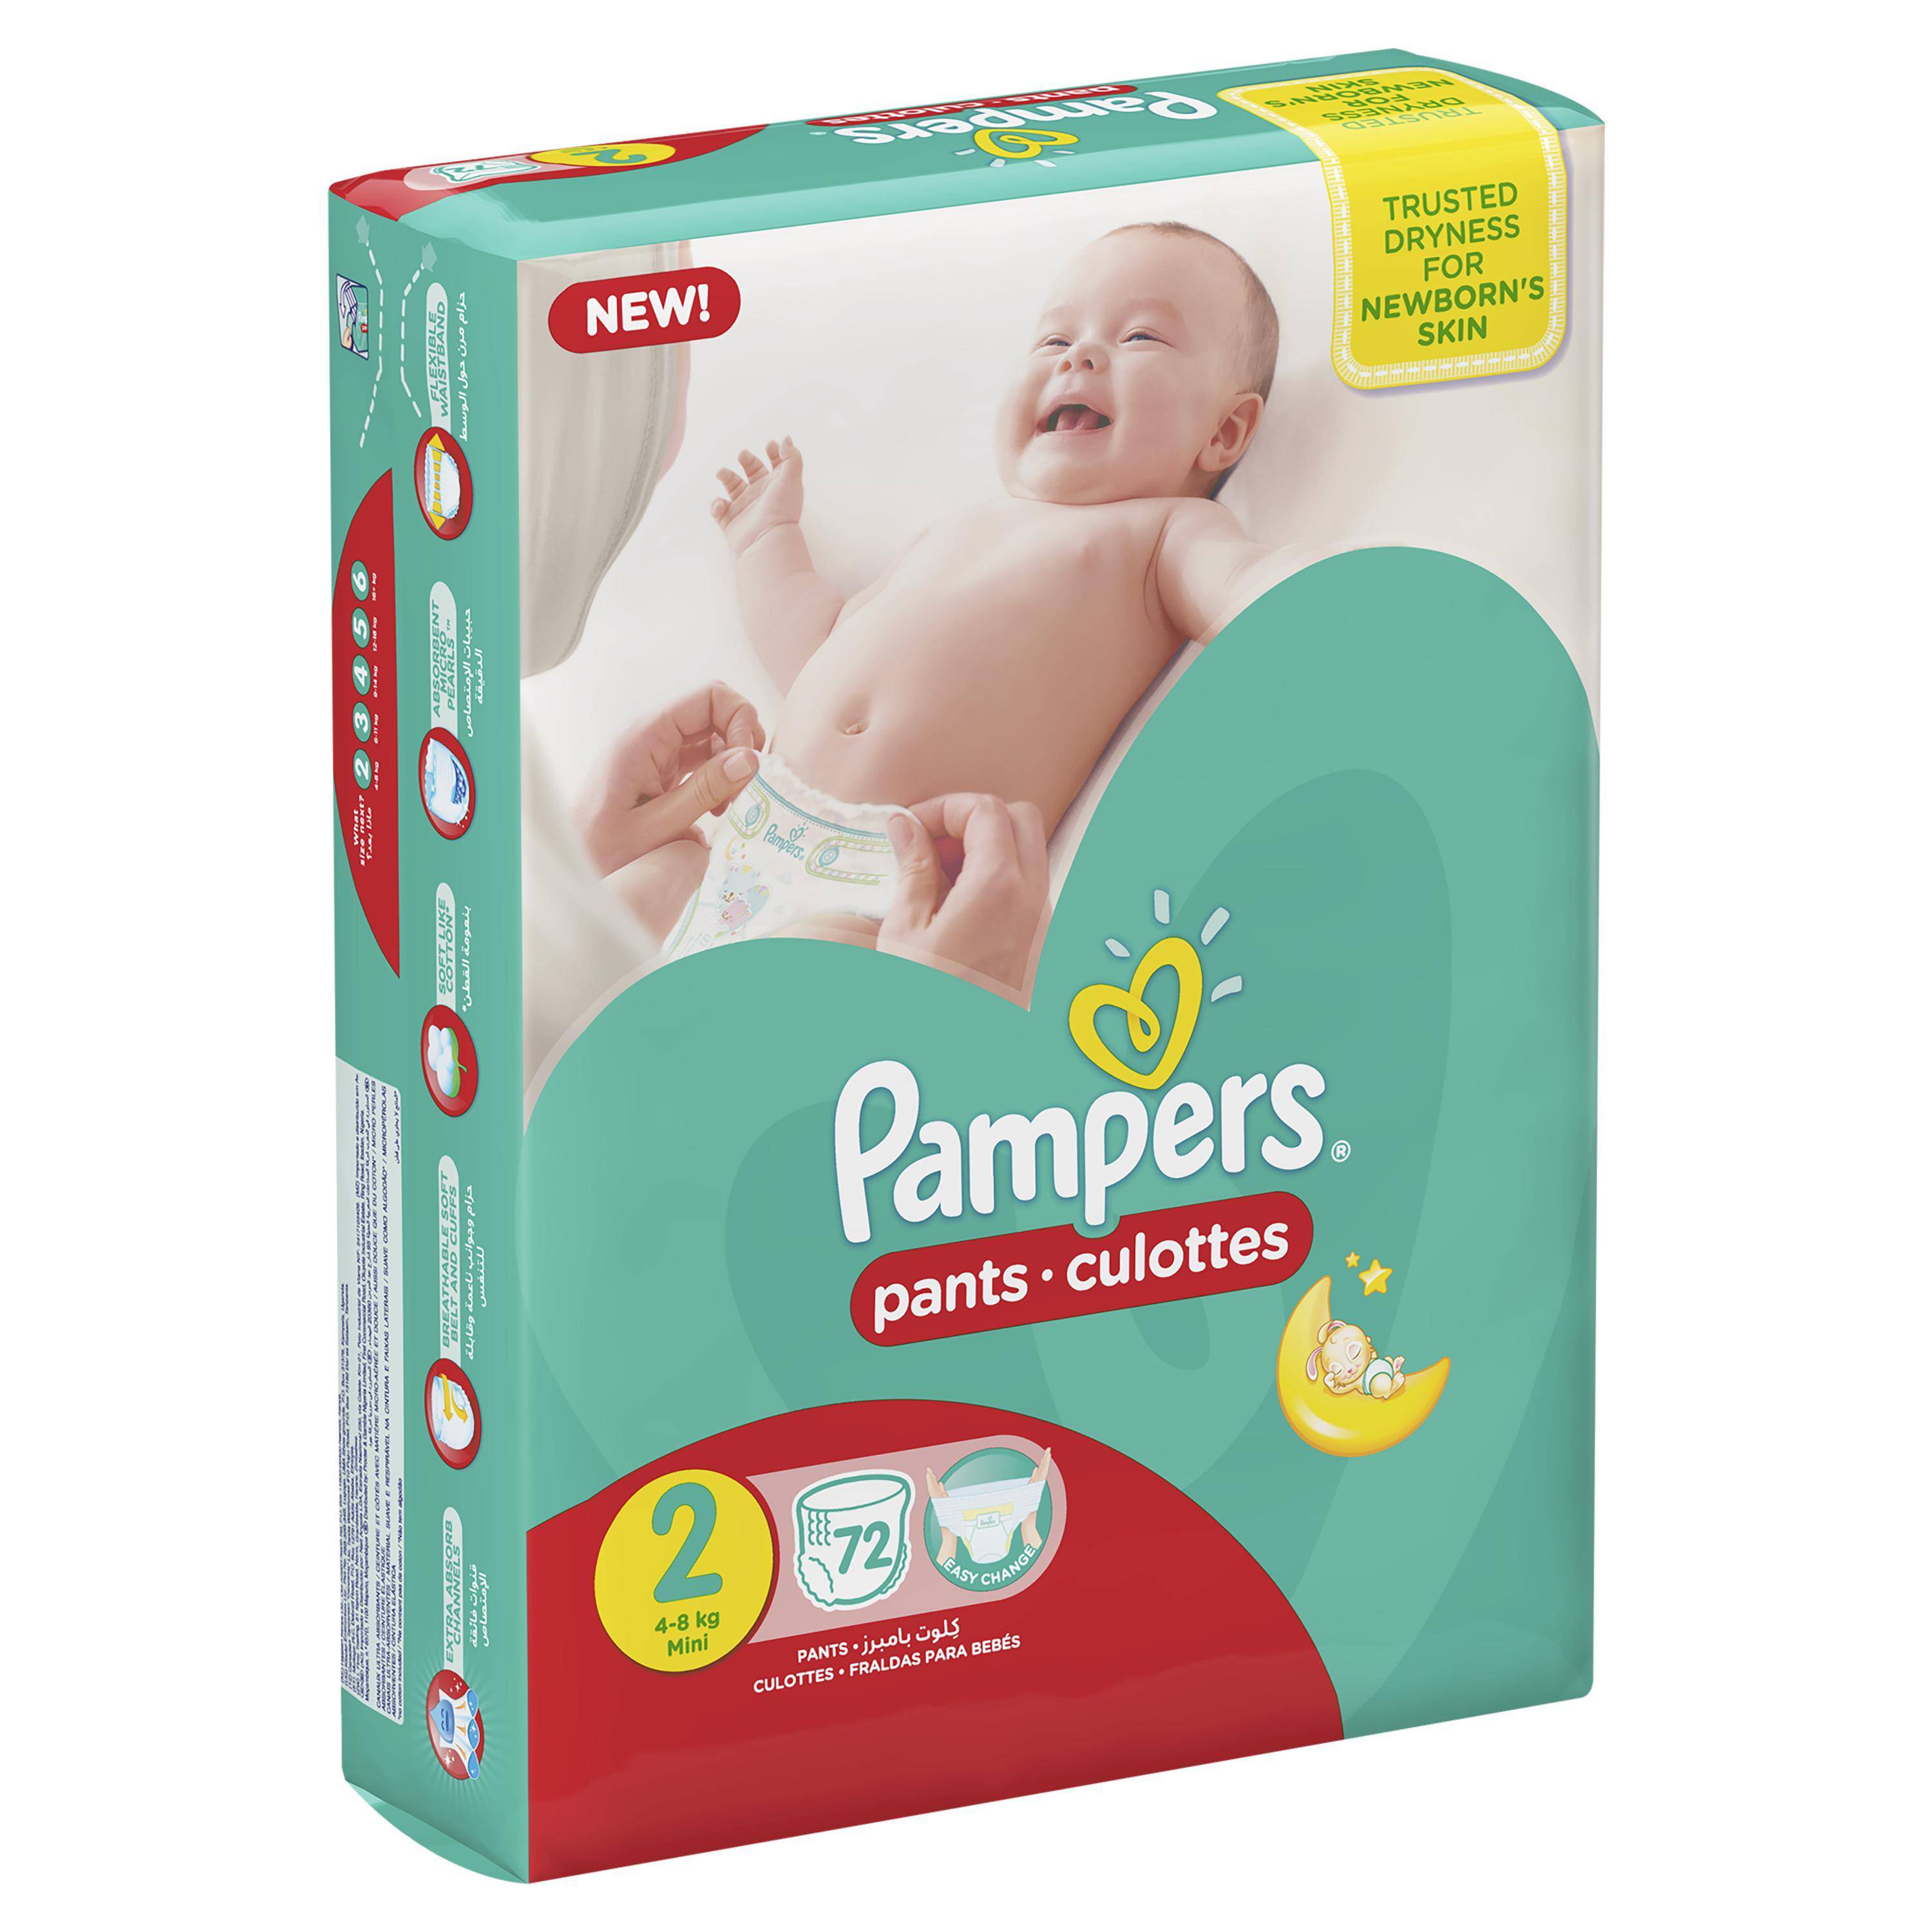 Pampers Mosquito Guard Pants – Small size baby diapers (4-8kg), 72 Count |  Dealsmagnet.com